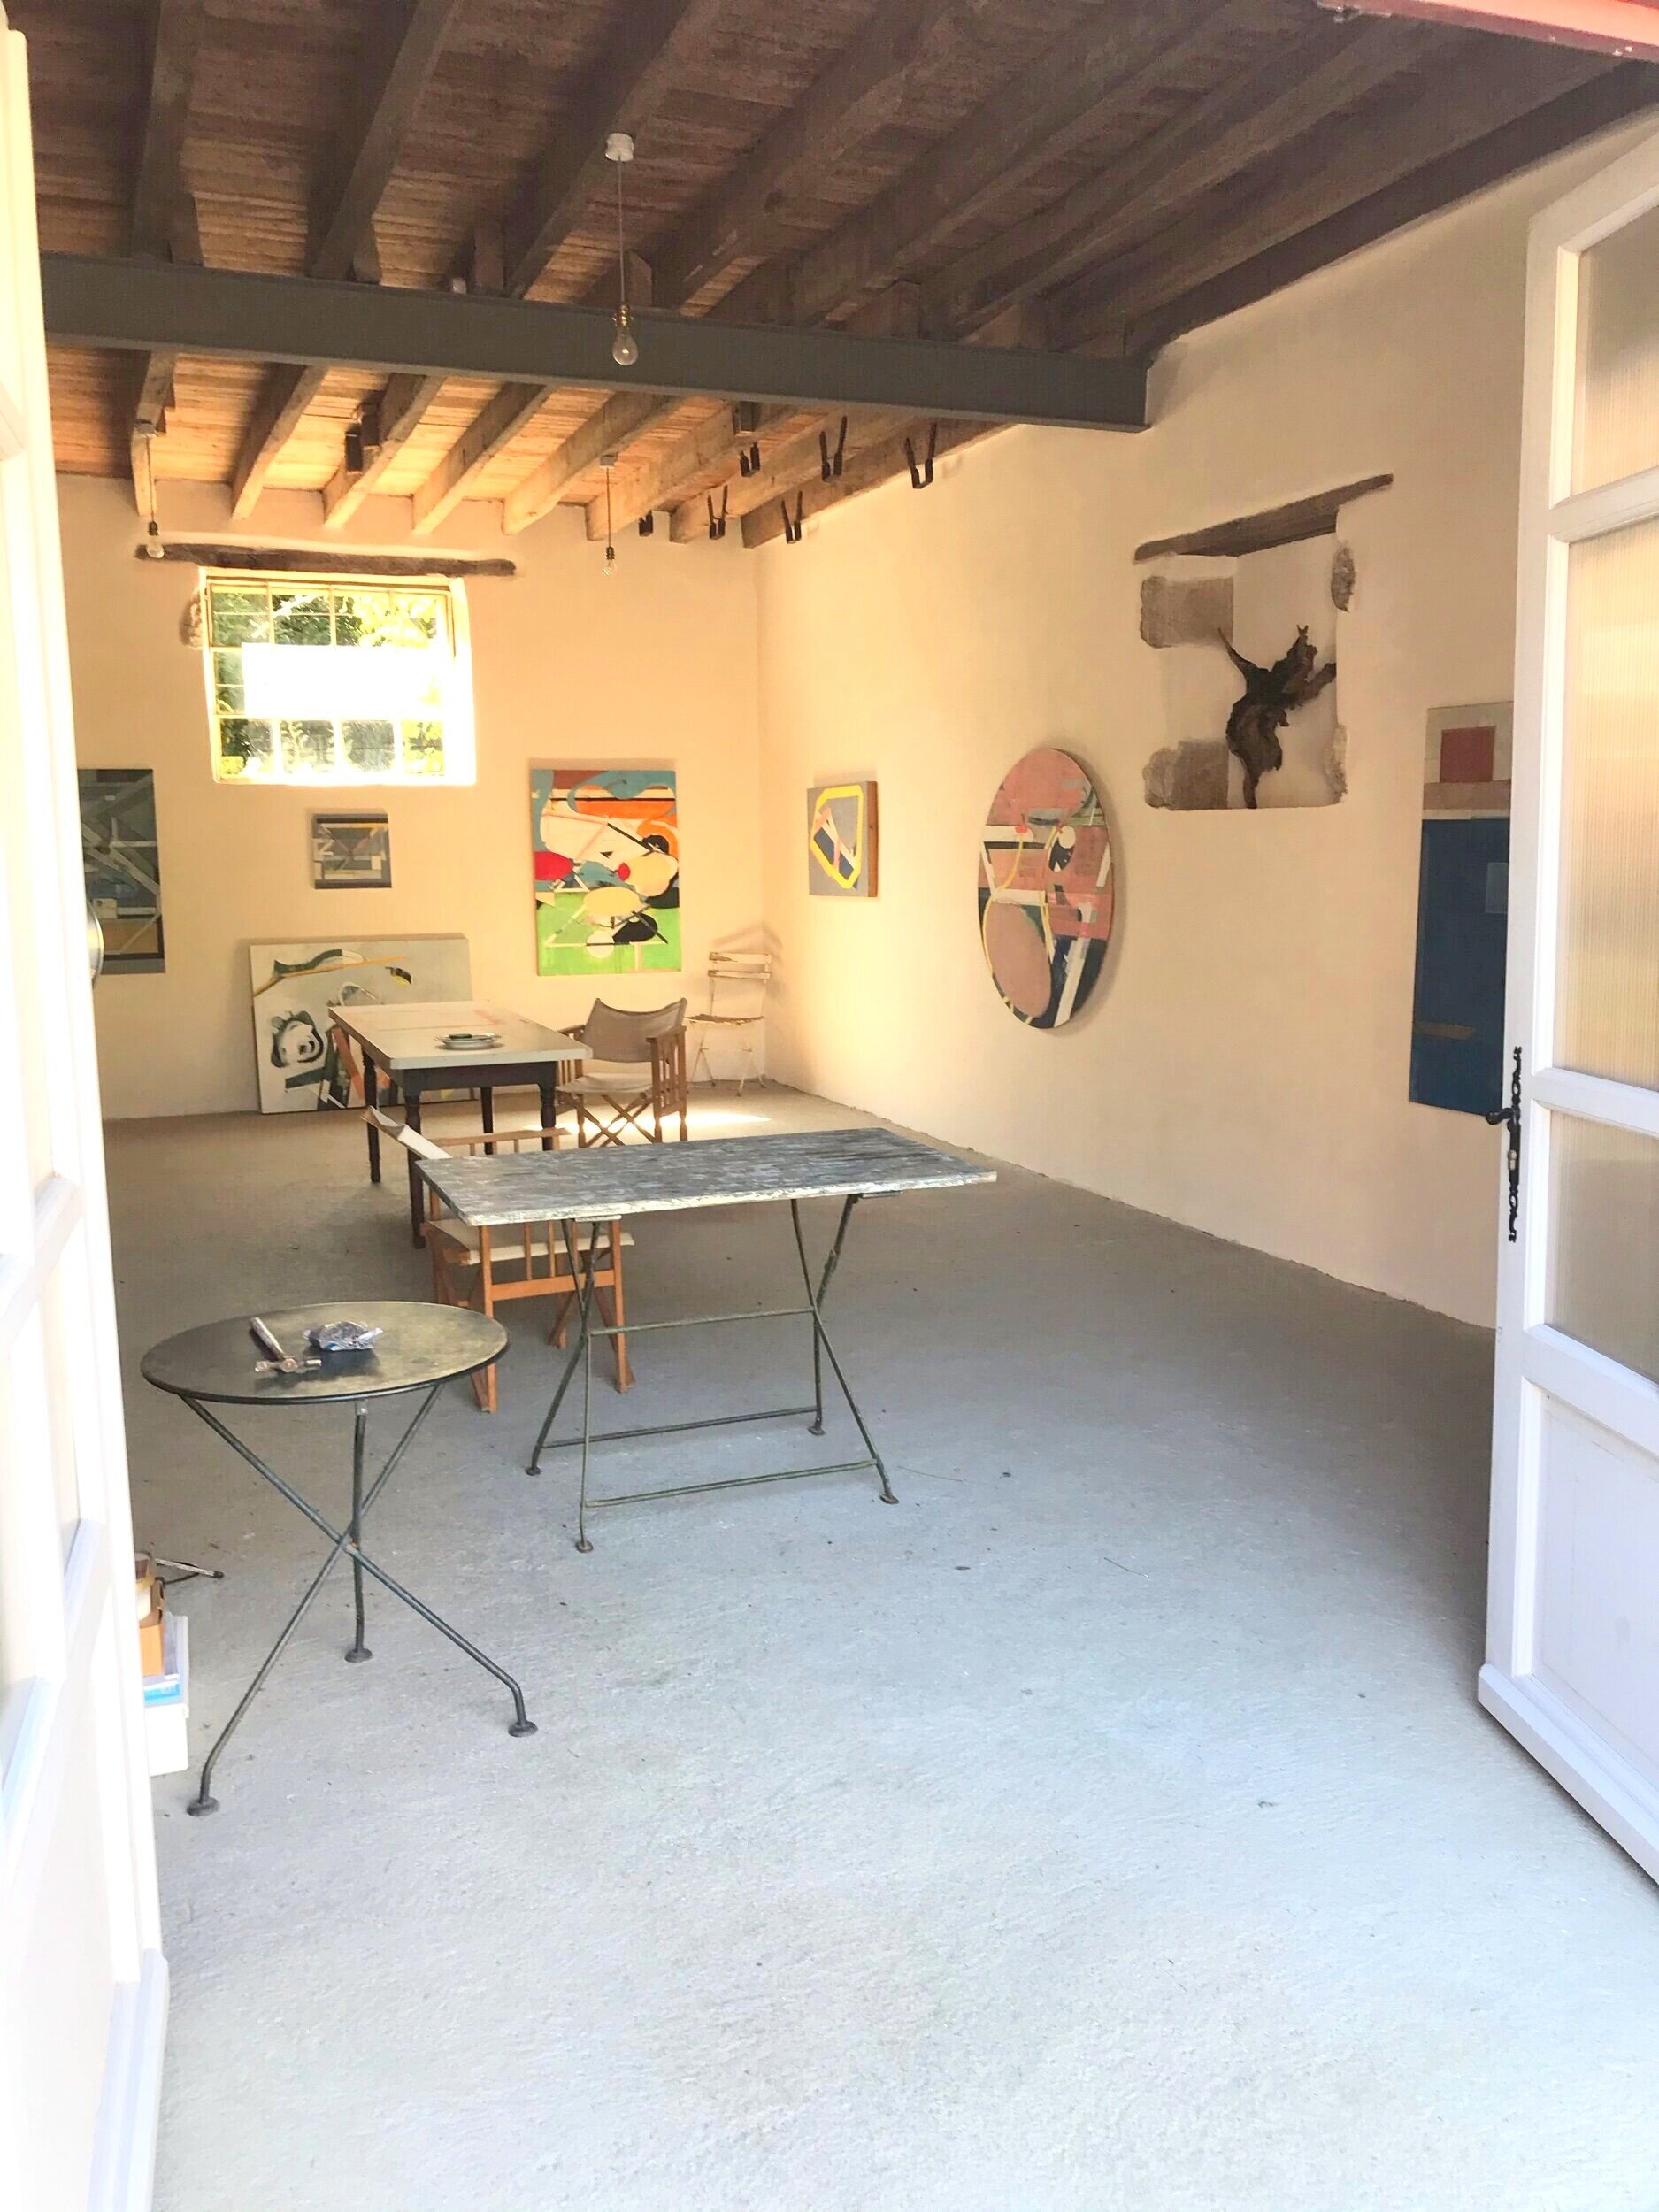 The studio with Ashley's paintings (the ceiling is now painted white).